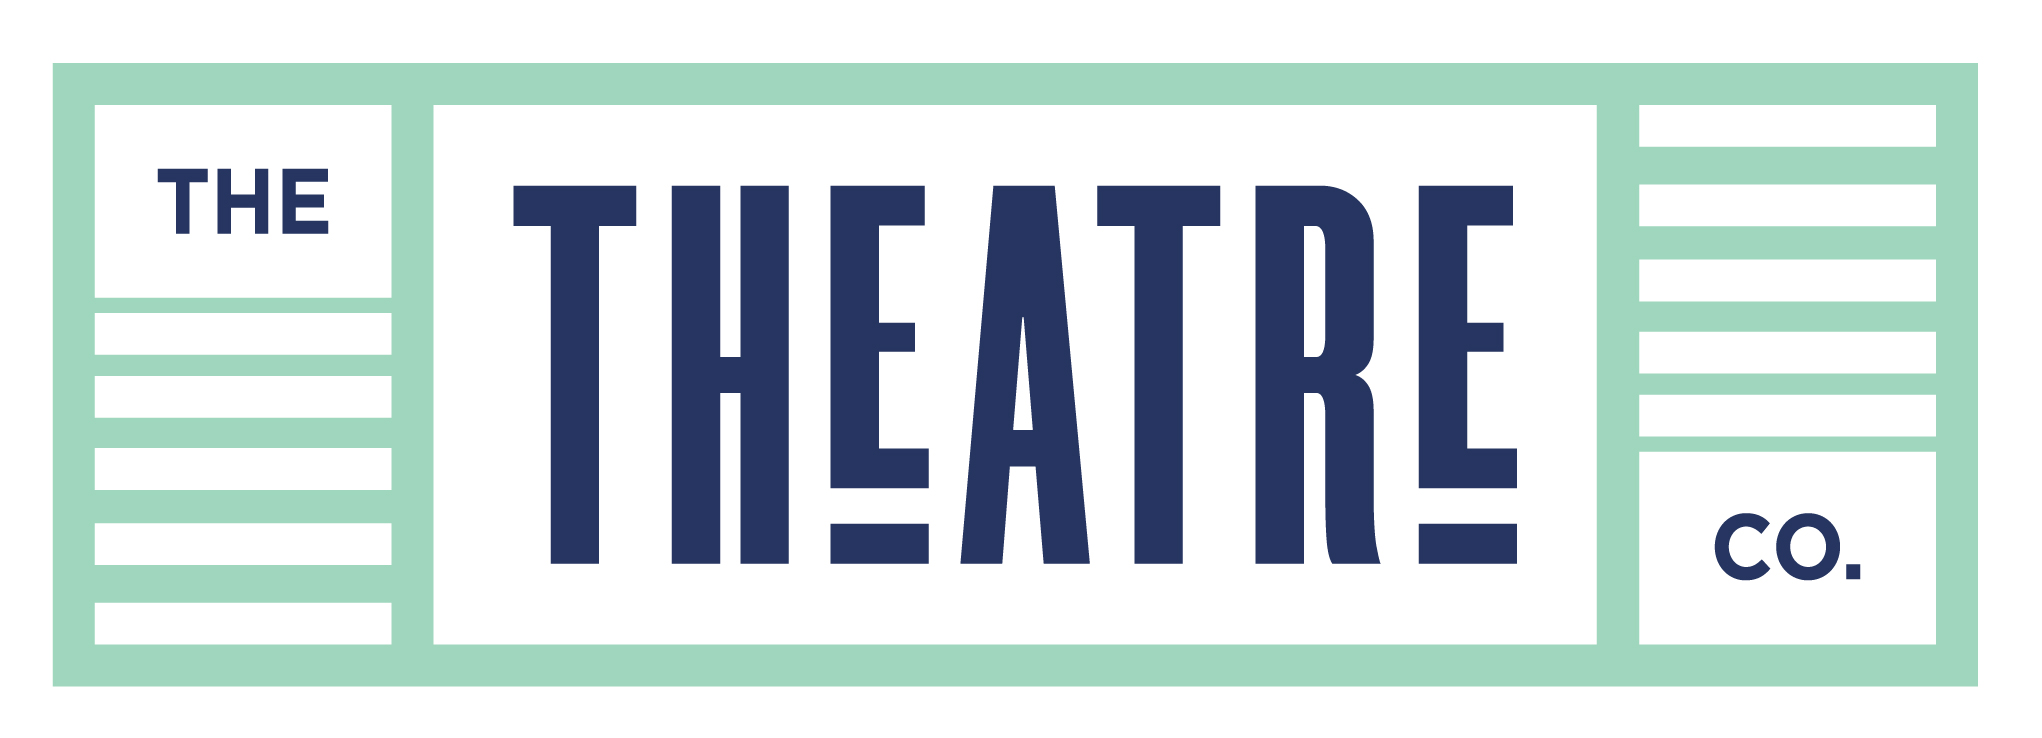 The Theatre Company Launches In 2020 